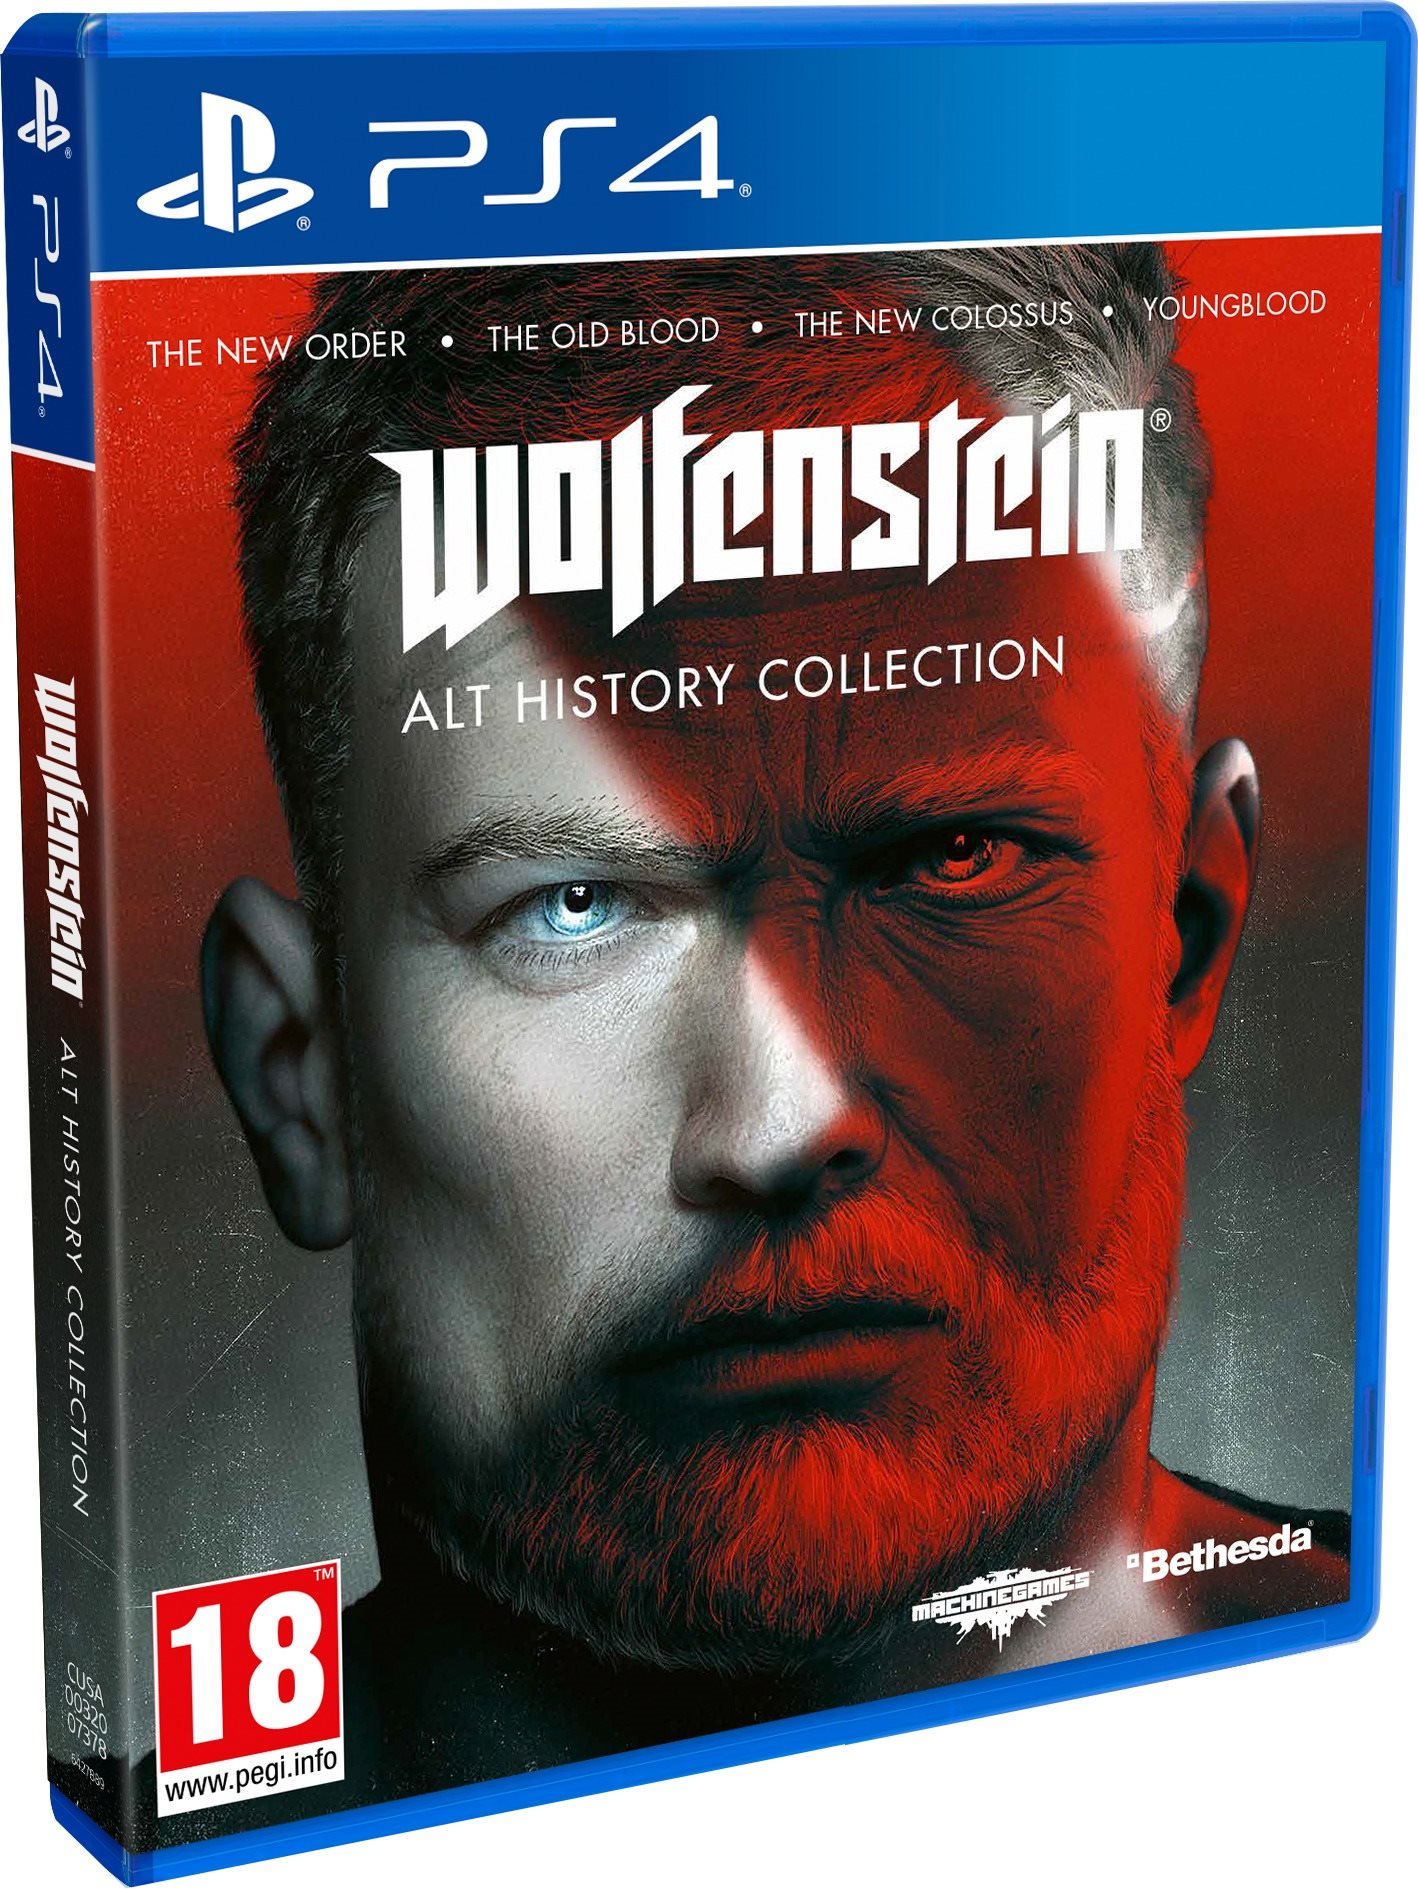 Wolfenstein: Alt History Collection - PS4, PS5